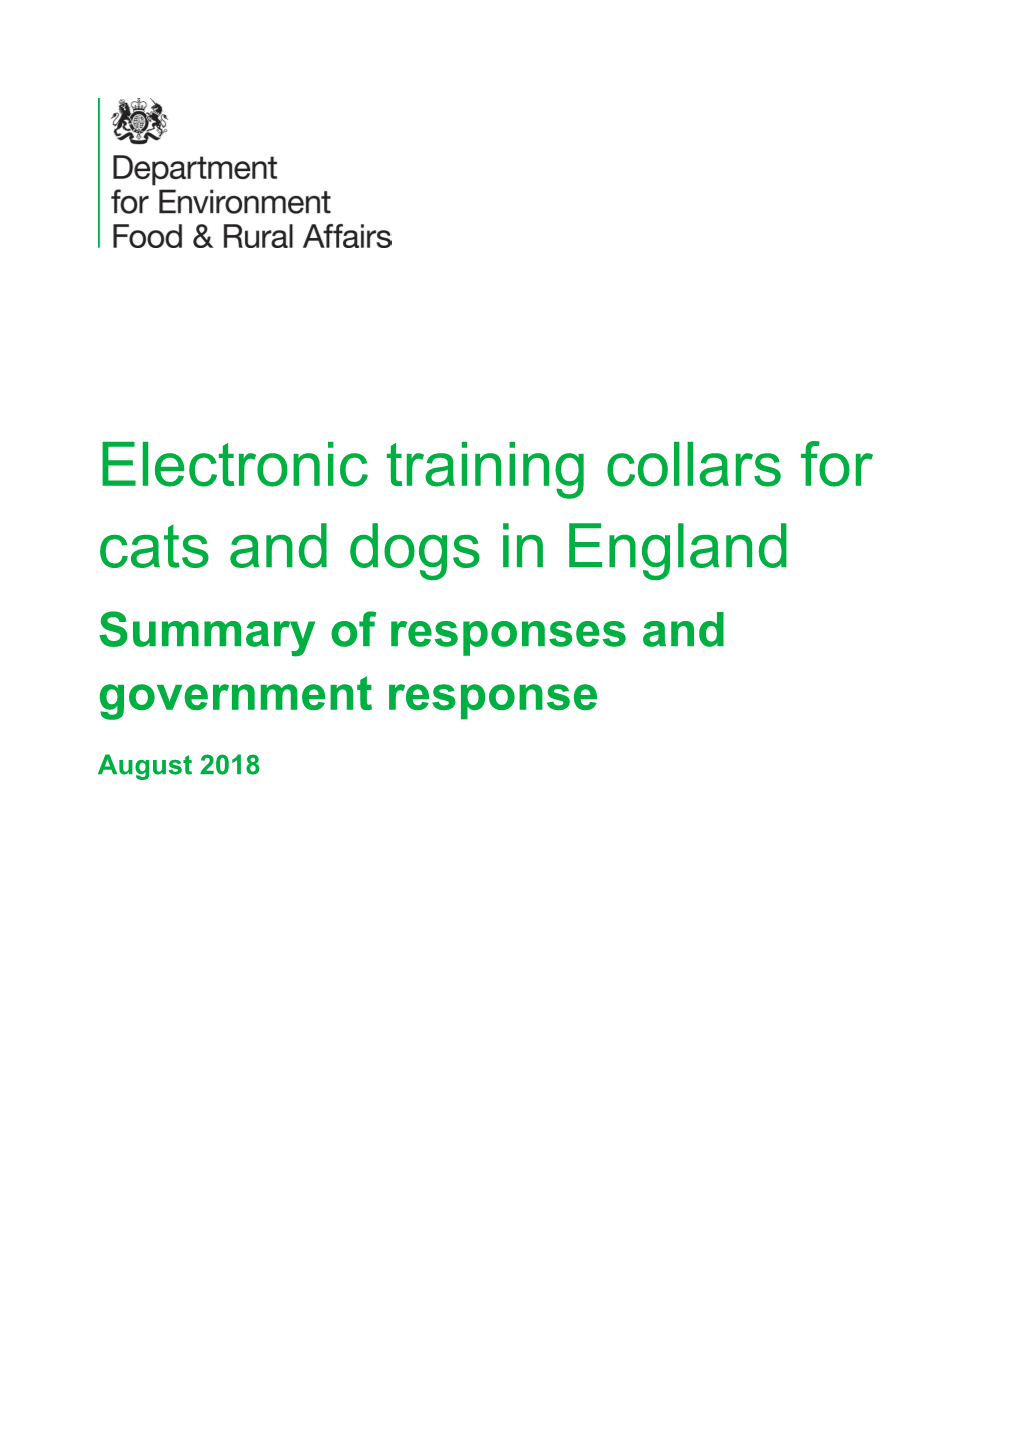 Electronic Training Collars for Cats and Dogs in England Summary of Responses and Government Response